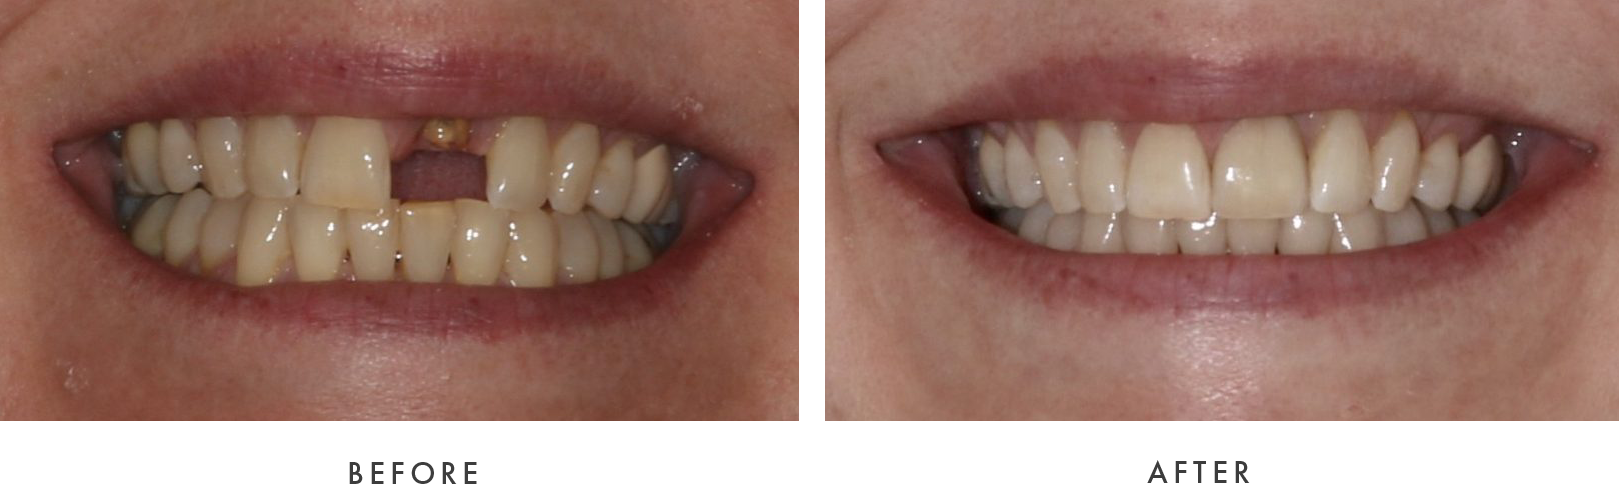 before and after Dental Implant Treatmemnt